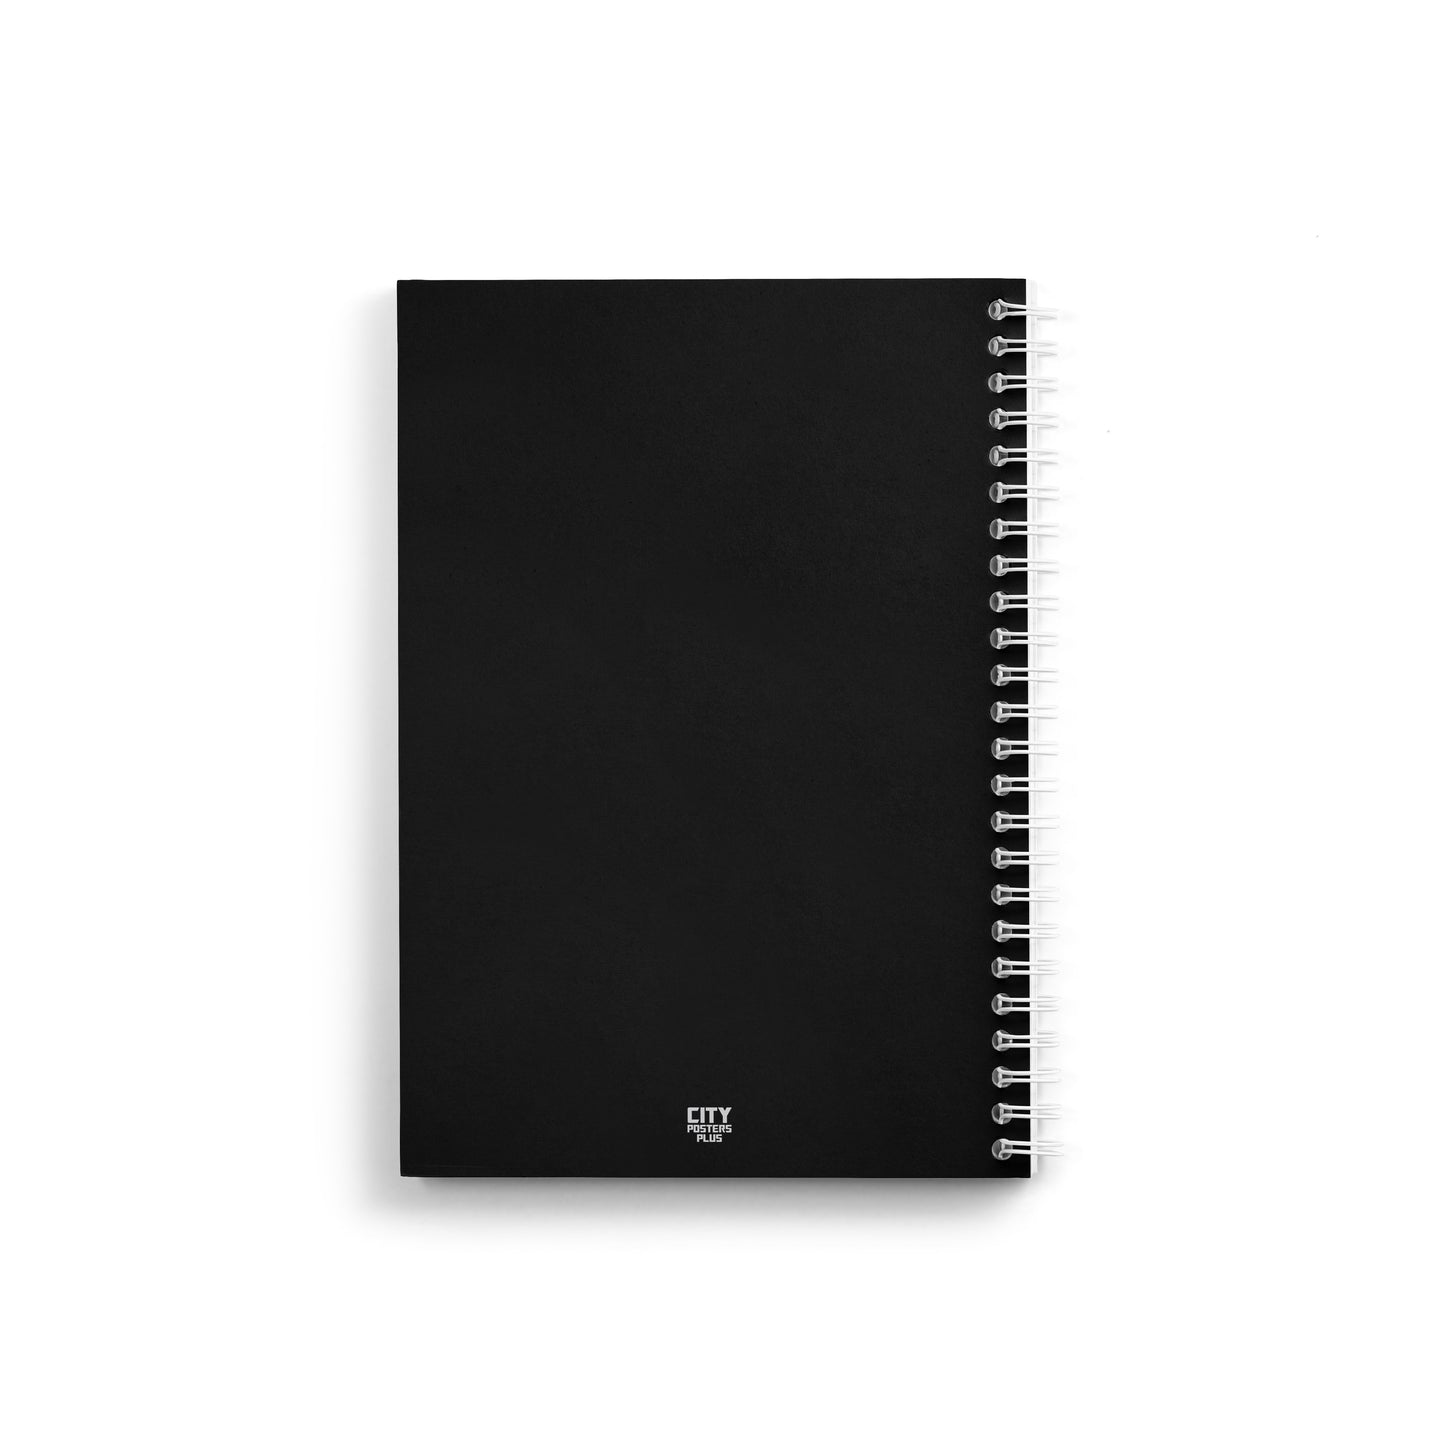 Chinnachowk Notebook (A5 Size, 100 Pages, Ruled)